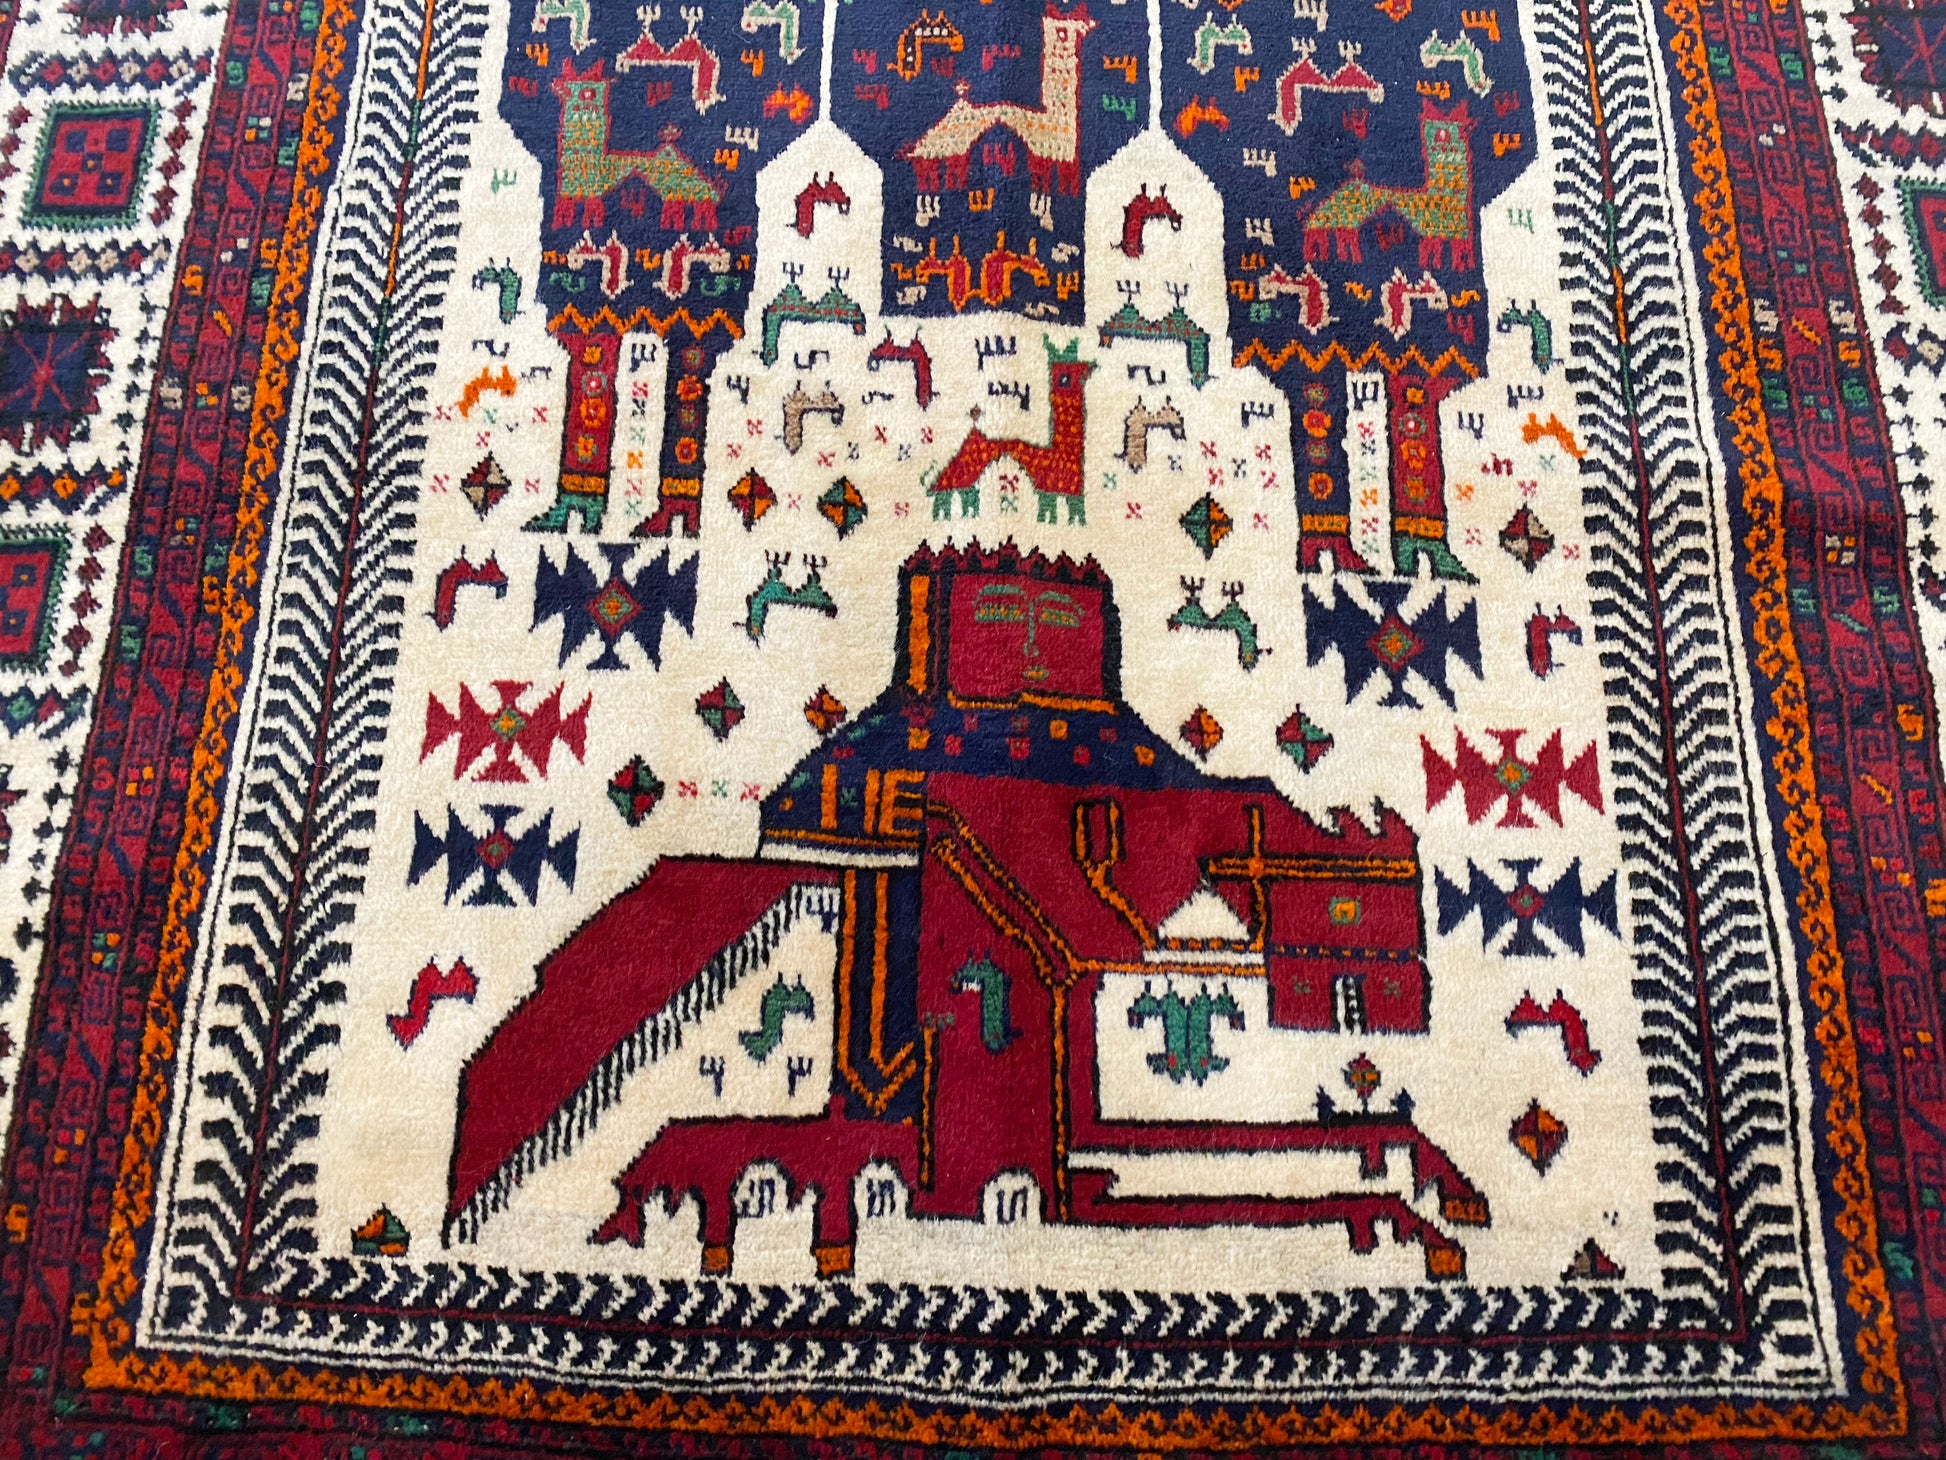 Detail of Afghan pictorial rug with cream base and three figures in blue cloaks across the middle, figures with crowns on horses at the top and bottom of rug woven in deep blue and reds